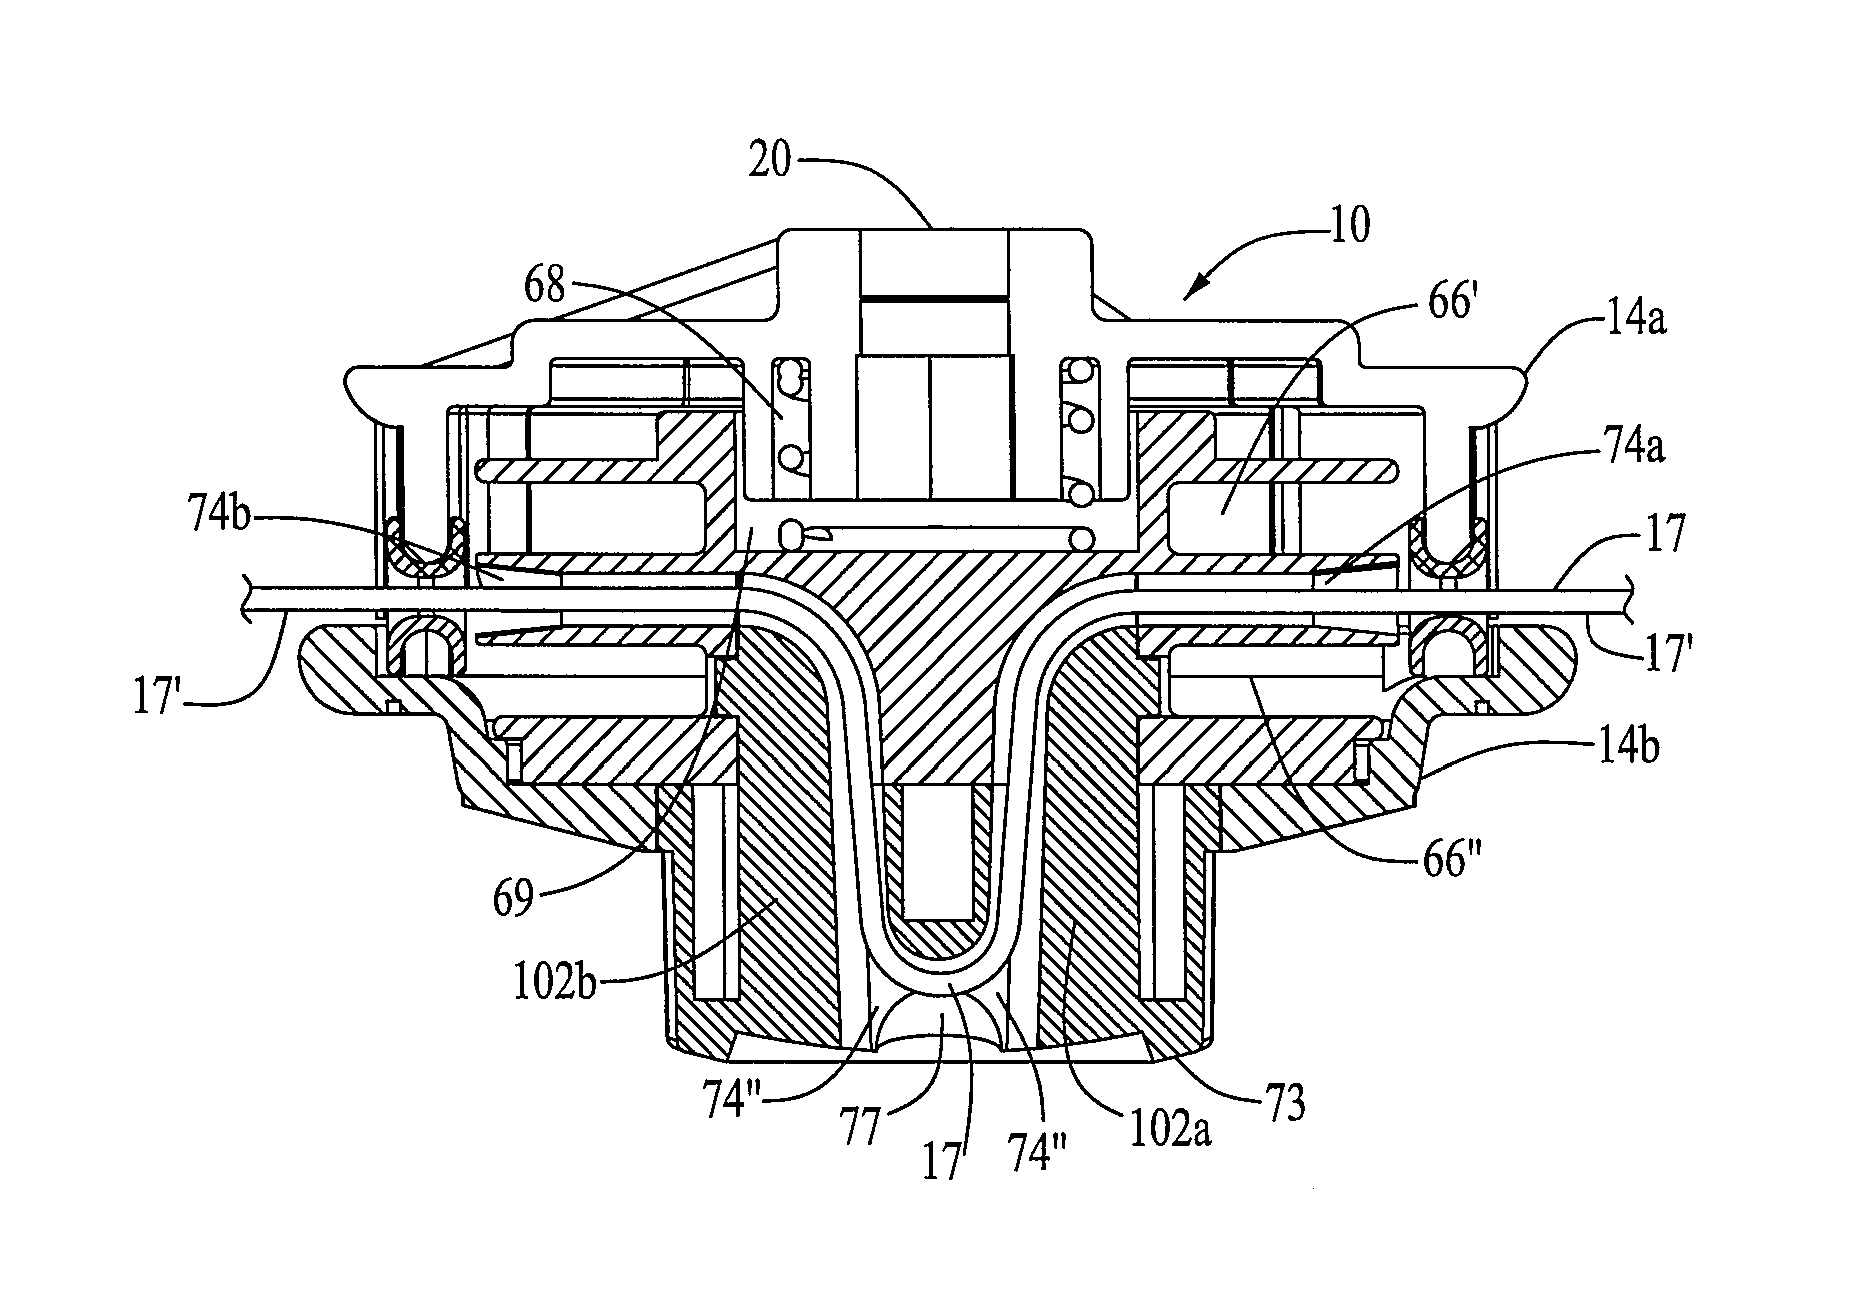 Trimmer head spool for use in flexible line rotary trimmer heads having improved line loading mechanism